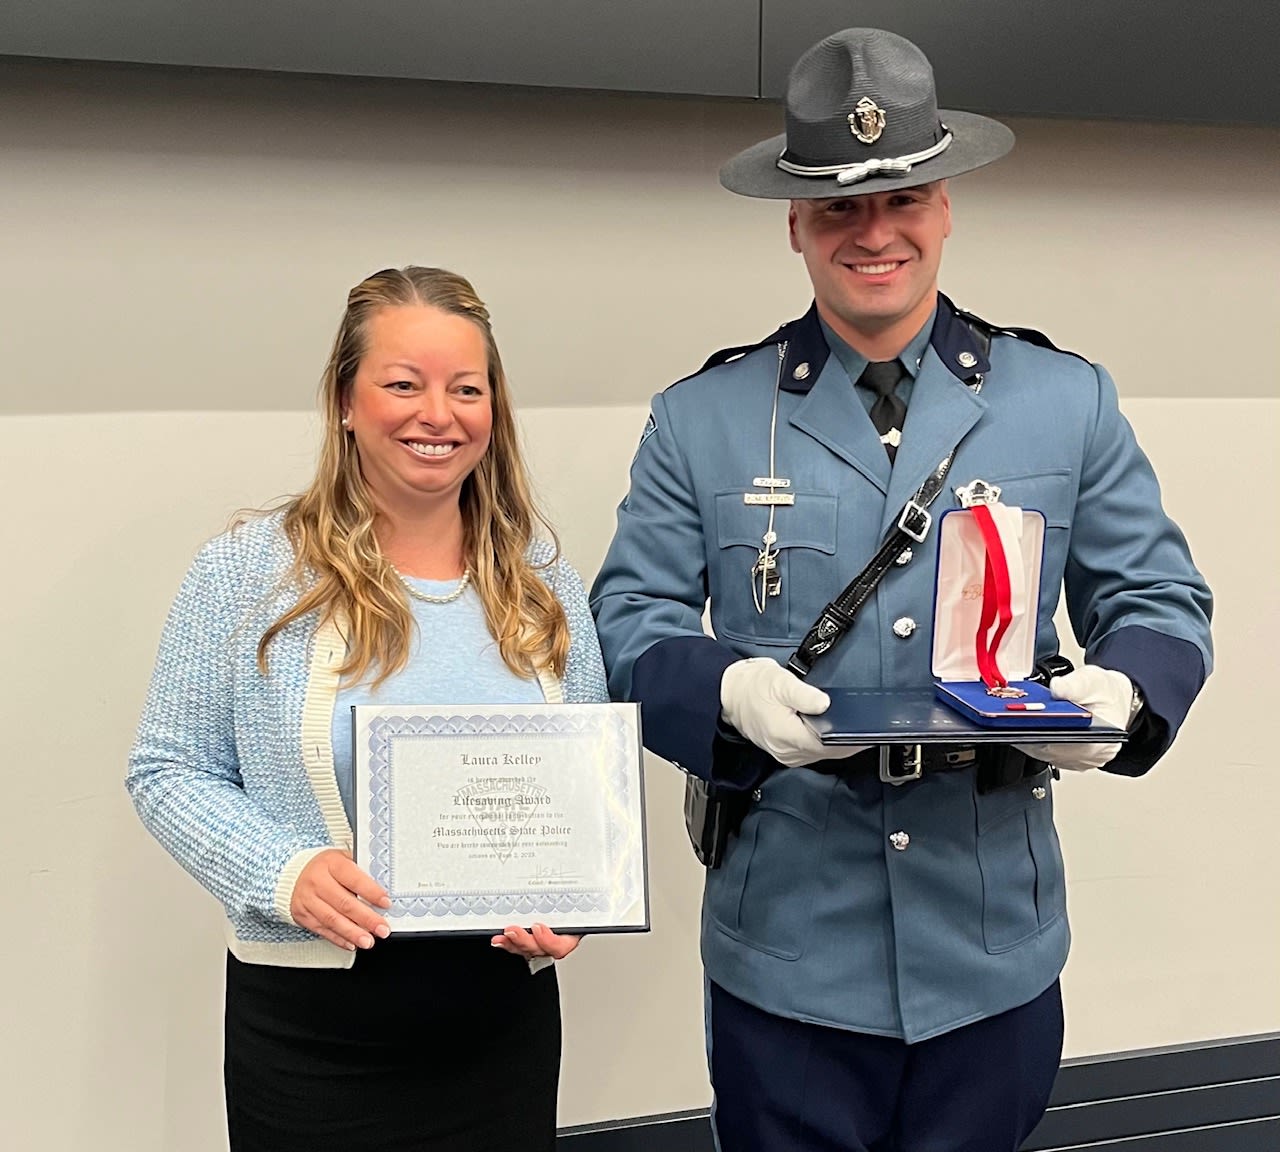 Island nurse recognized by State Police - The Martha's Vineyard Times